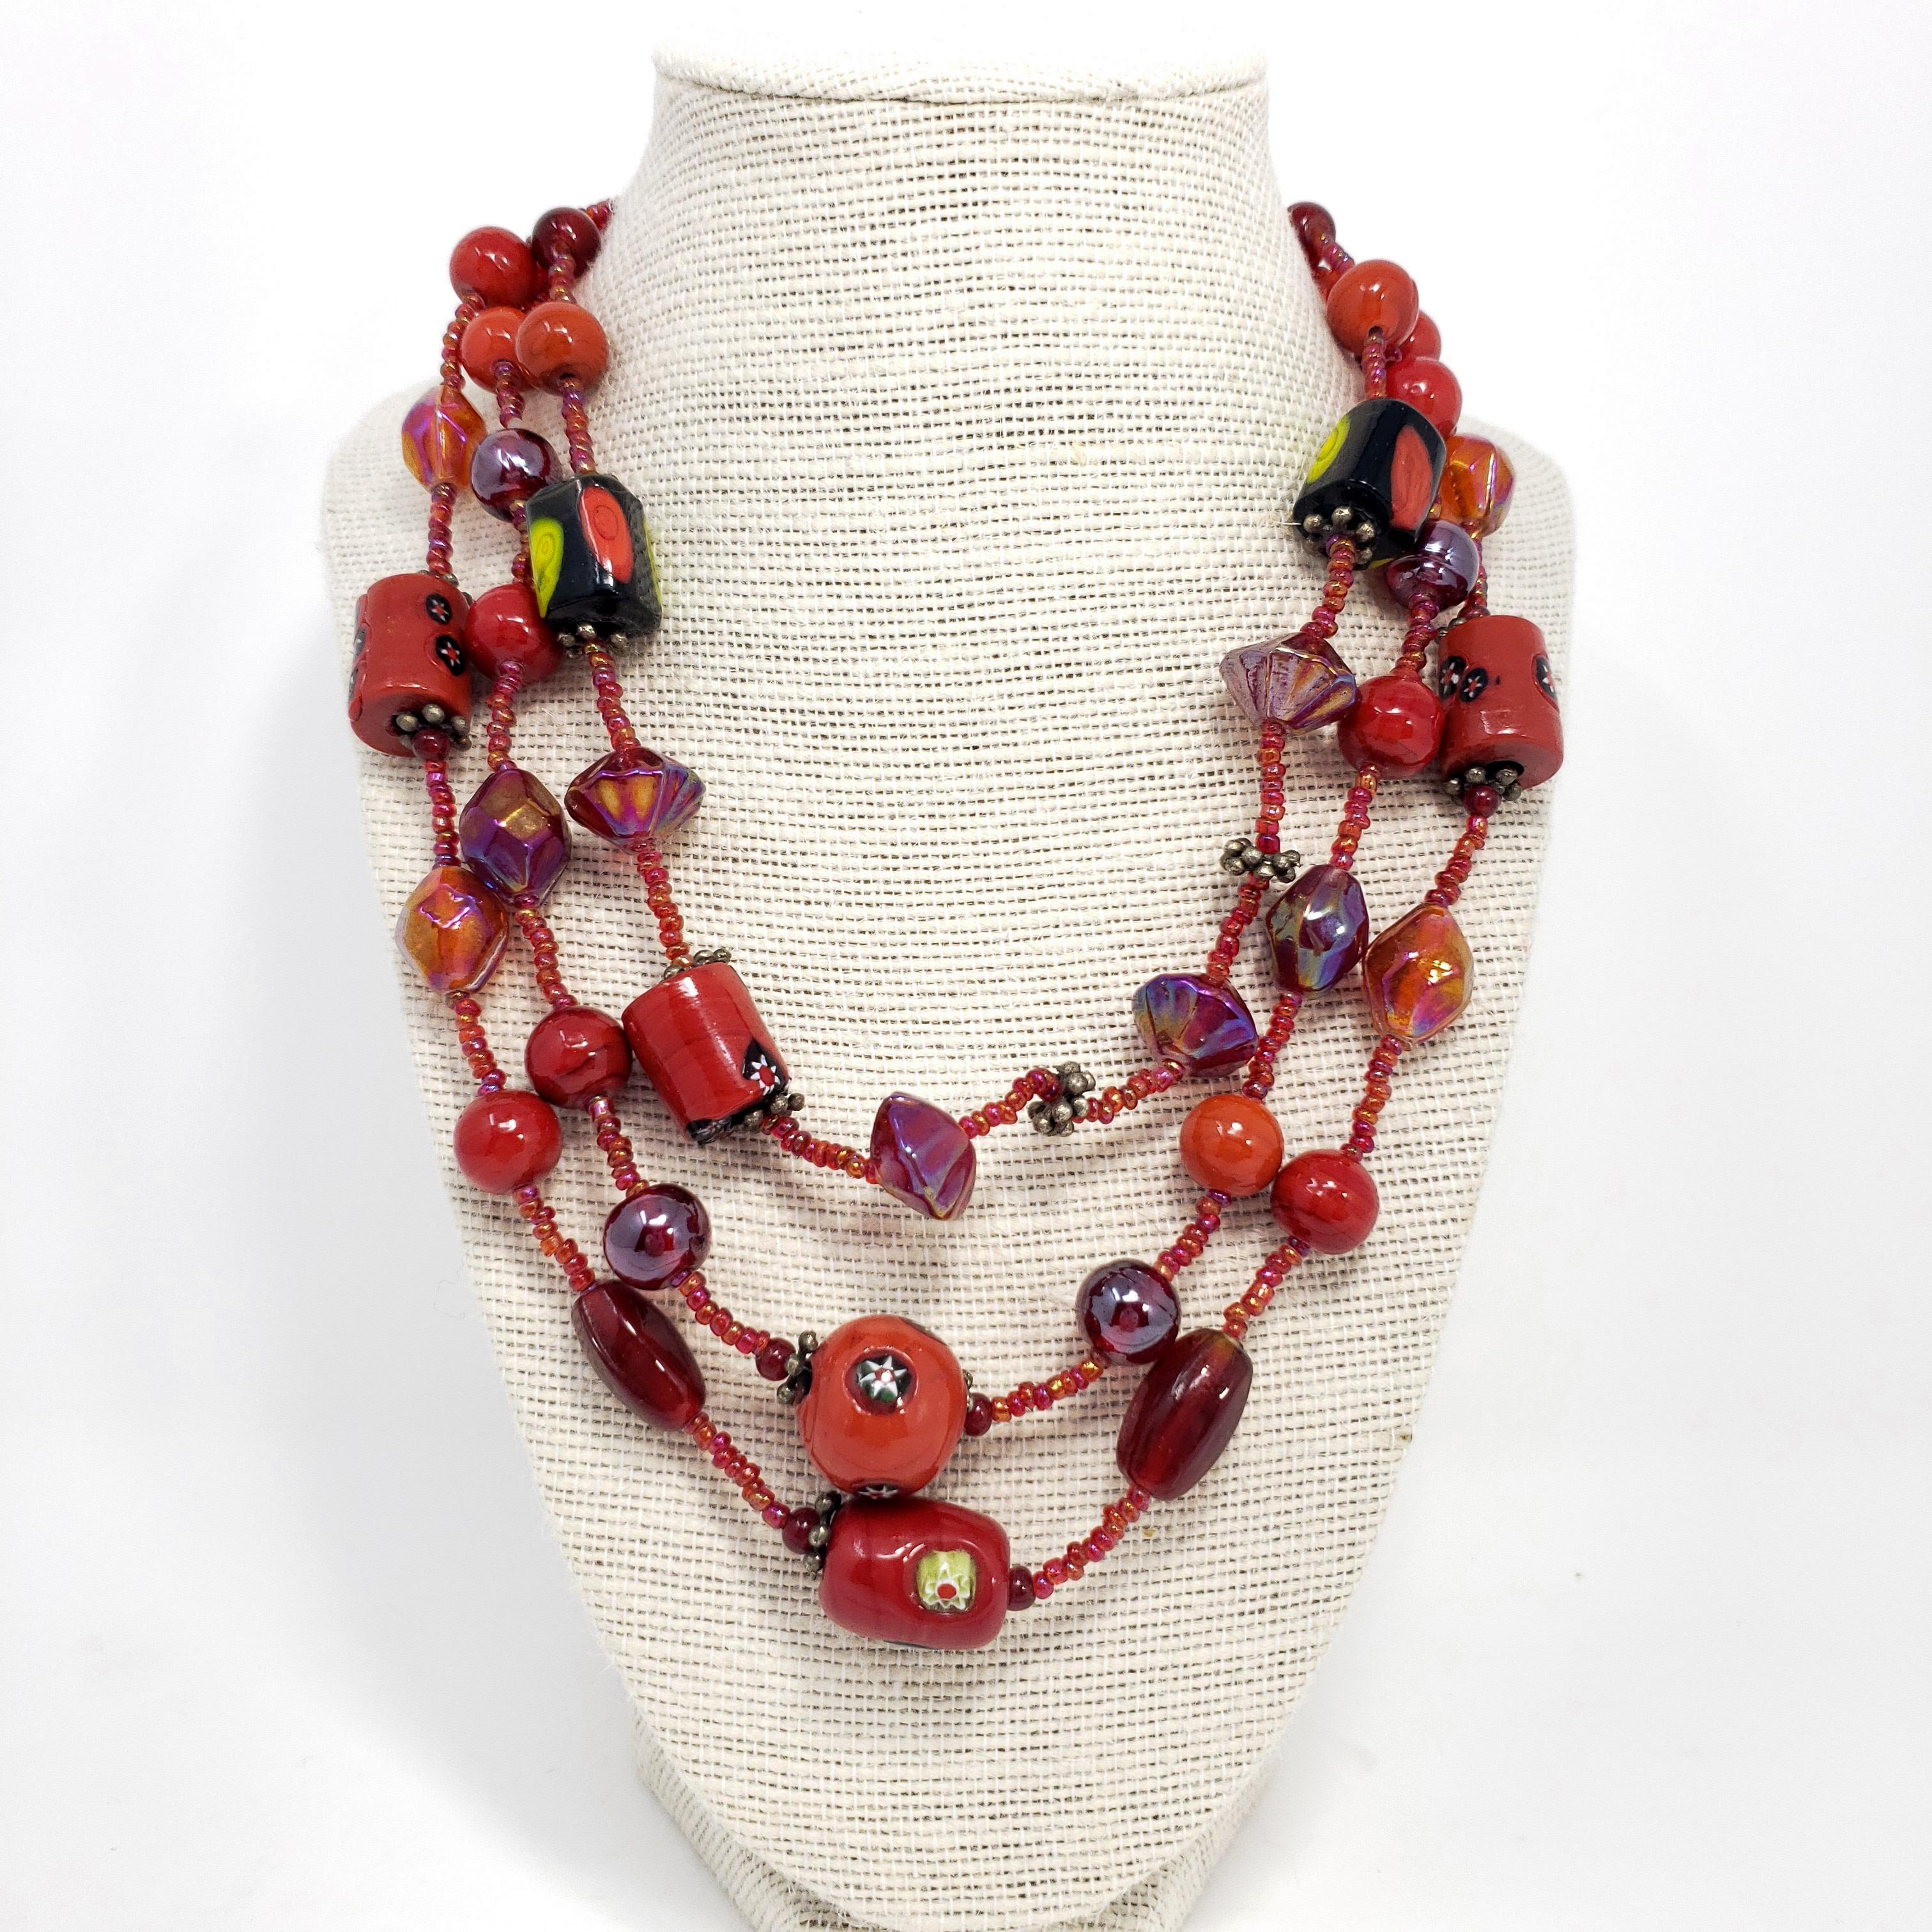 Stylish vintage necklace with three strands of red art-glass beads with an elegant silver-tone hook clasp.

Length: 16.5 to 18.5 inches with extension chain.